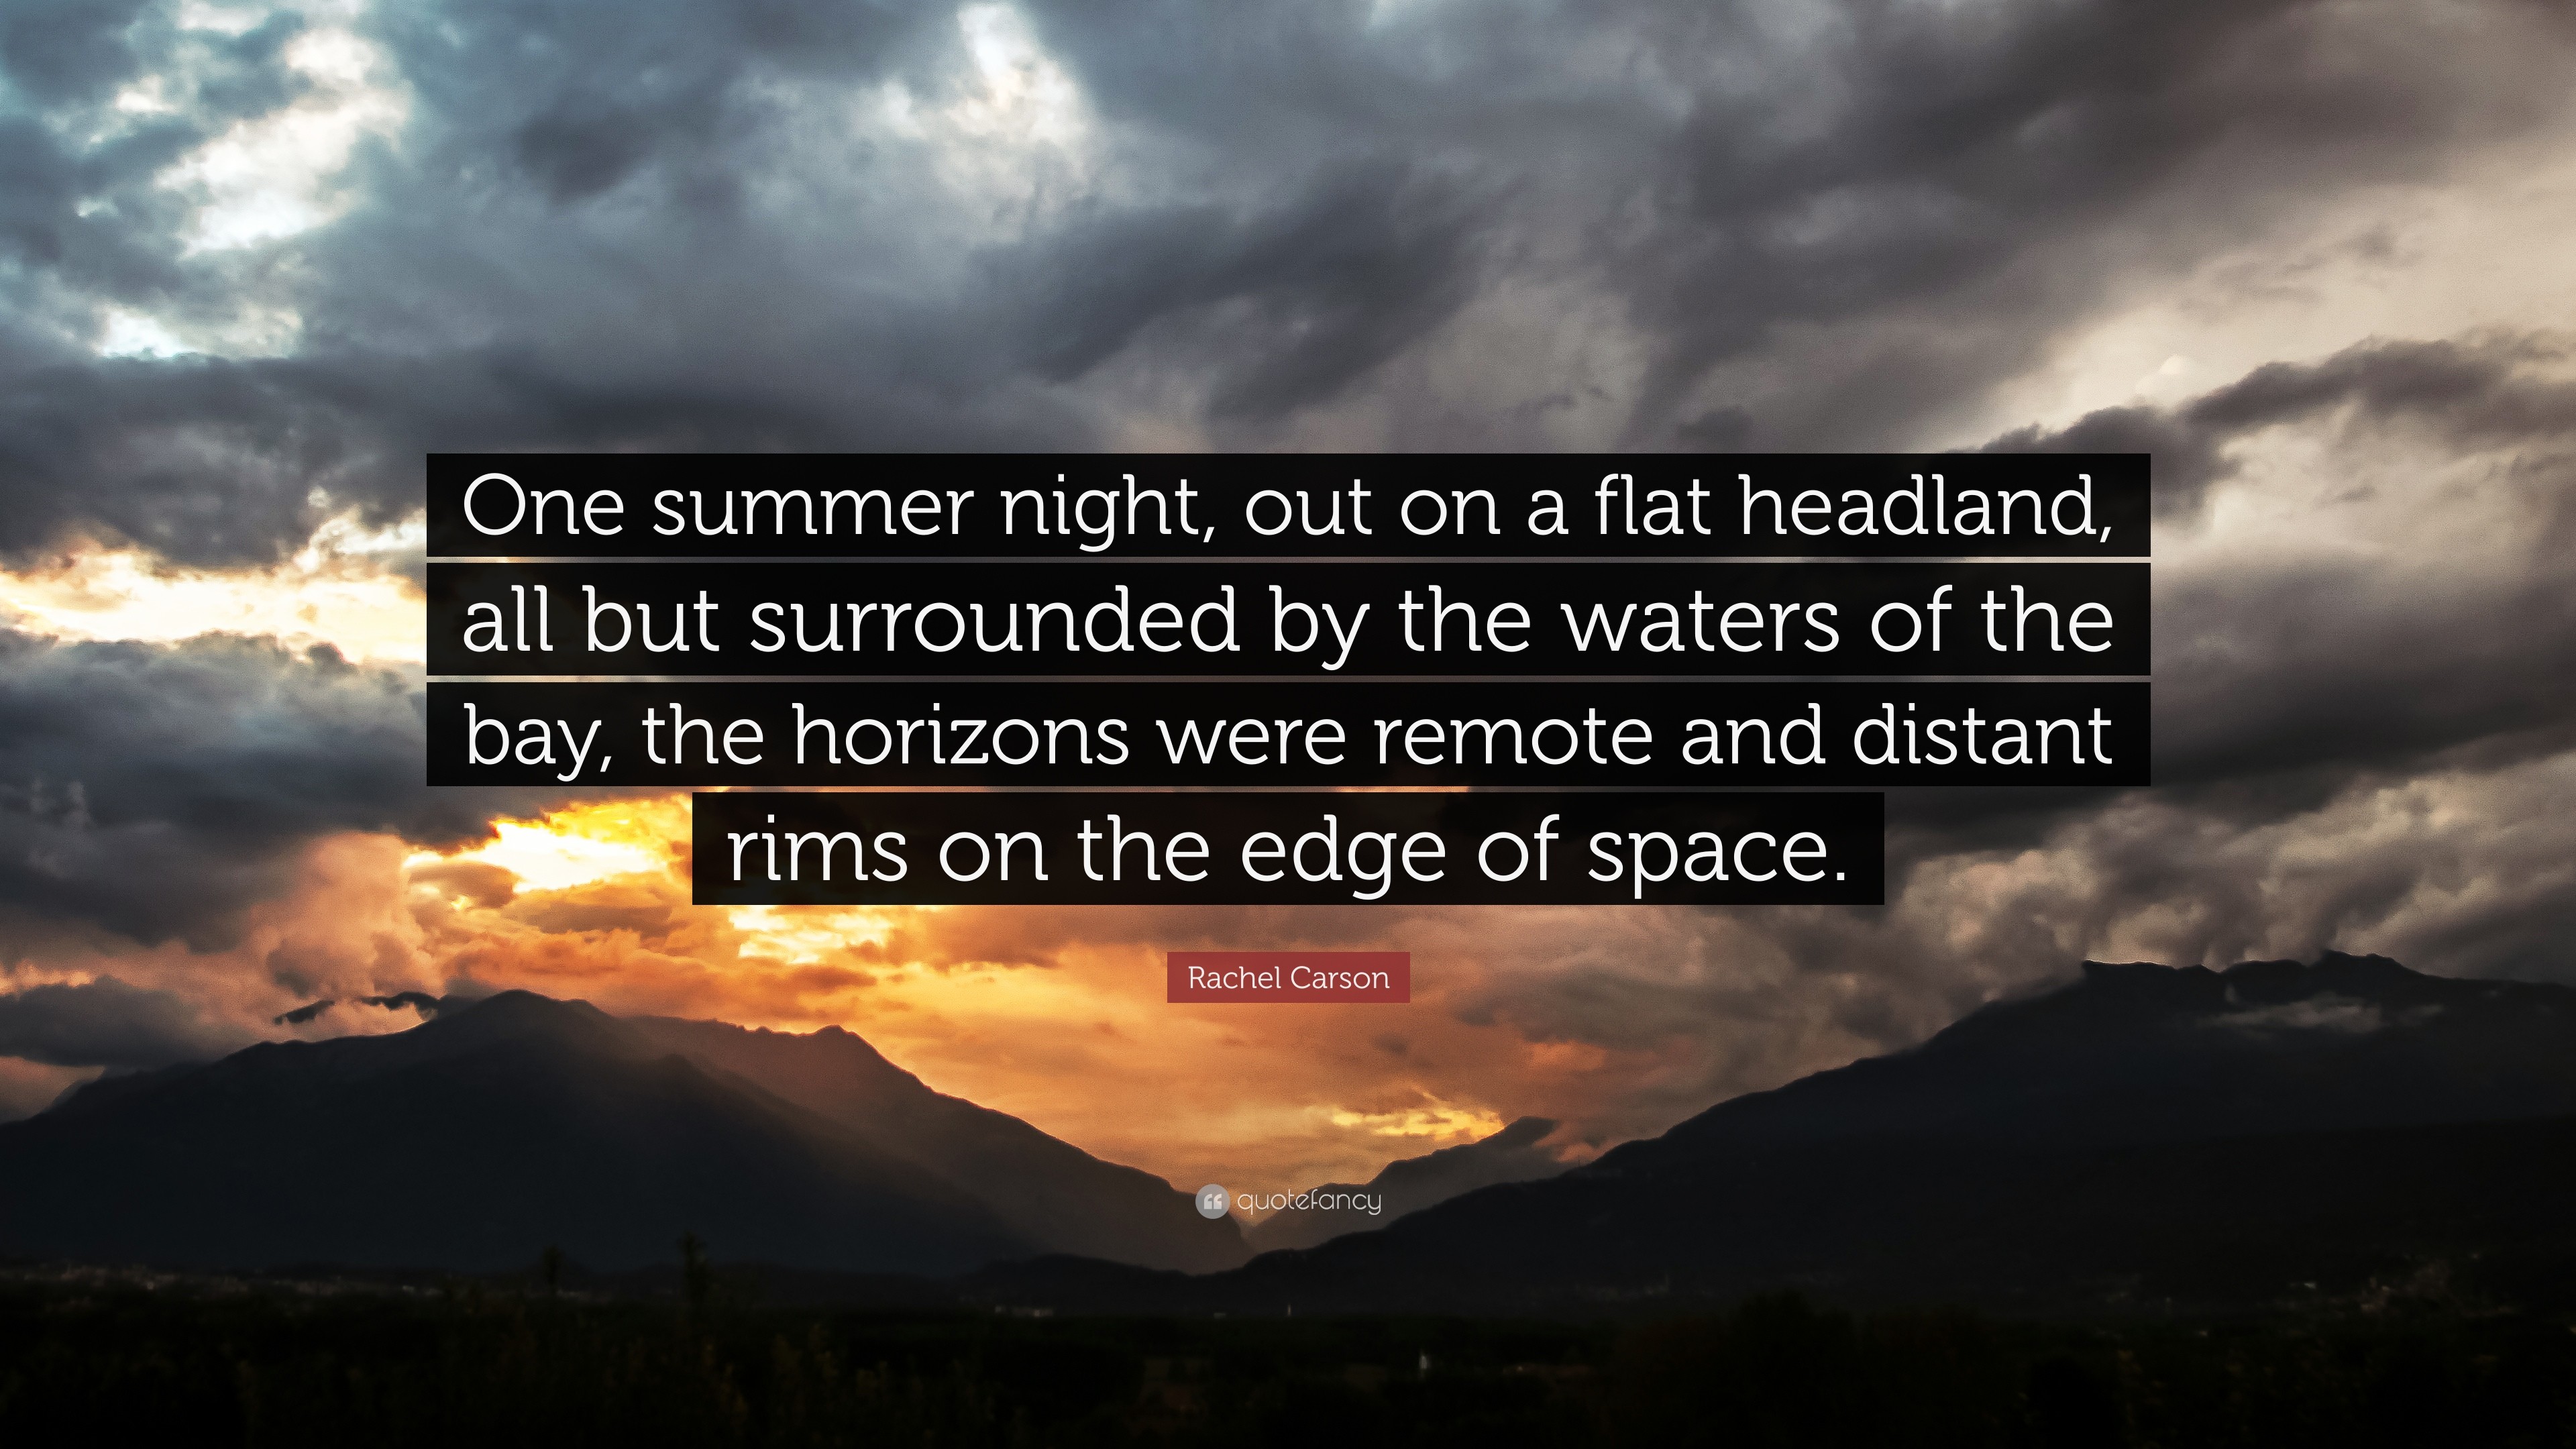 3840x2160 Rachel Carson Quote: “One summer night, out on a flat headland, all